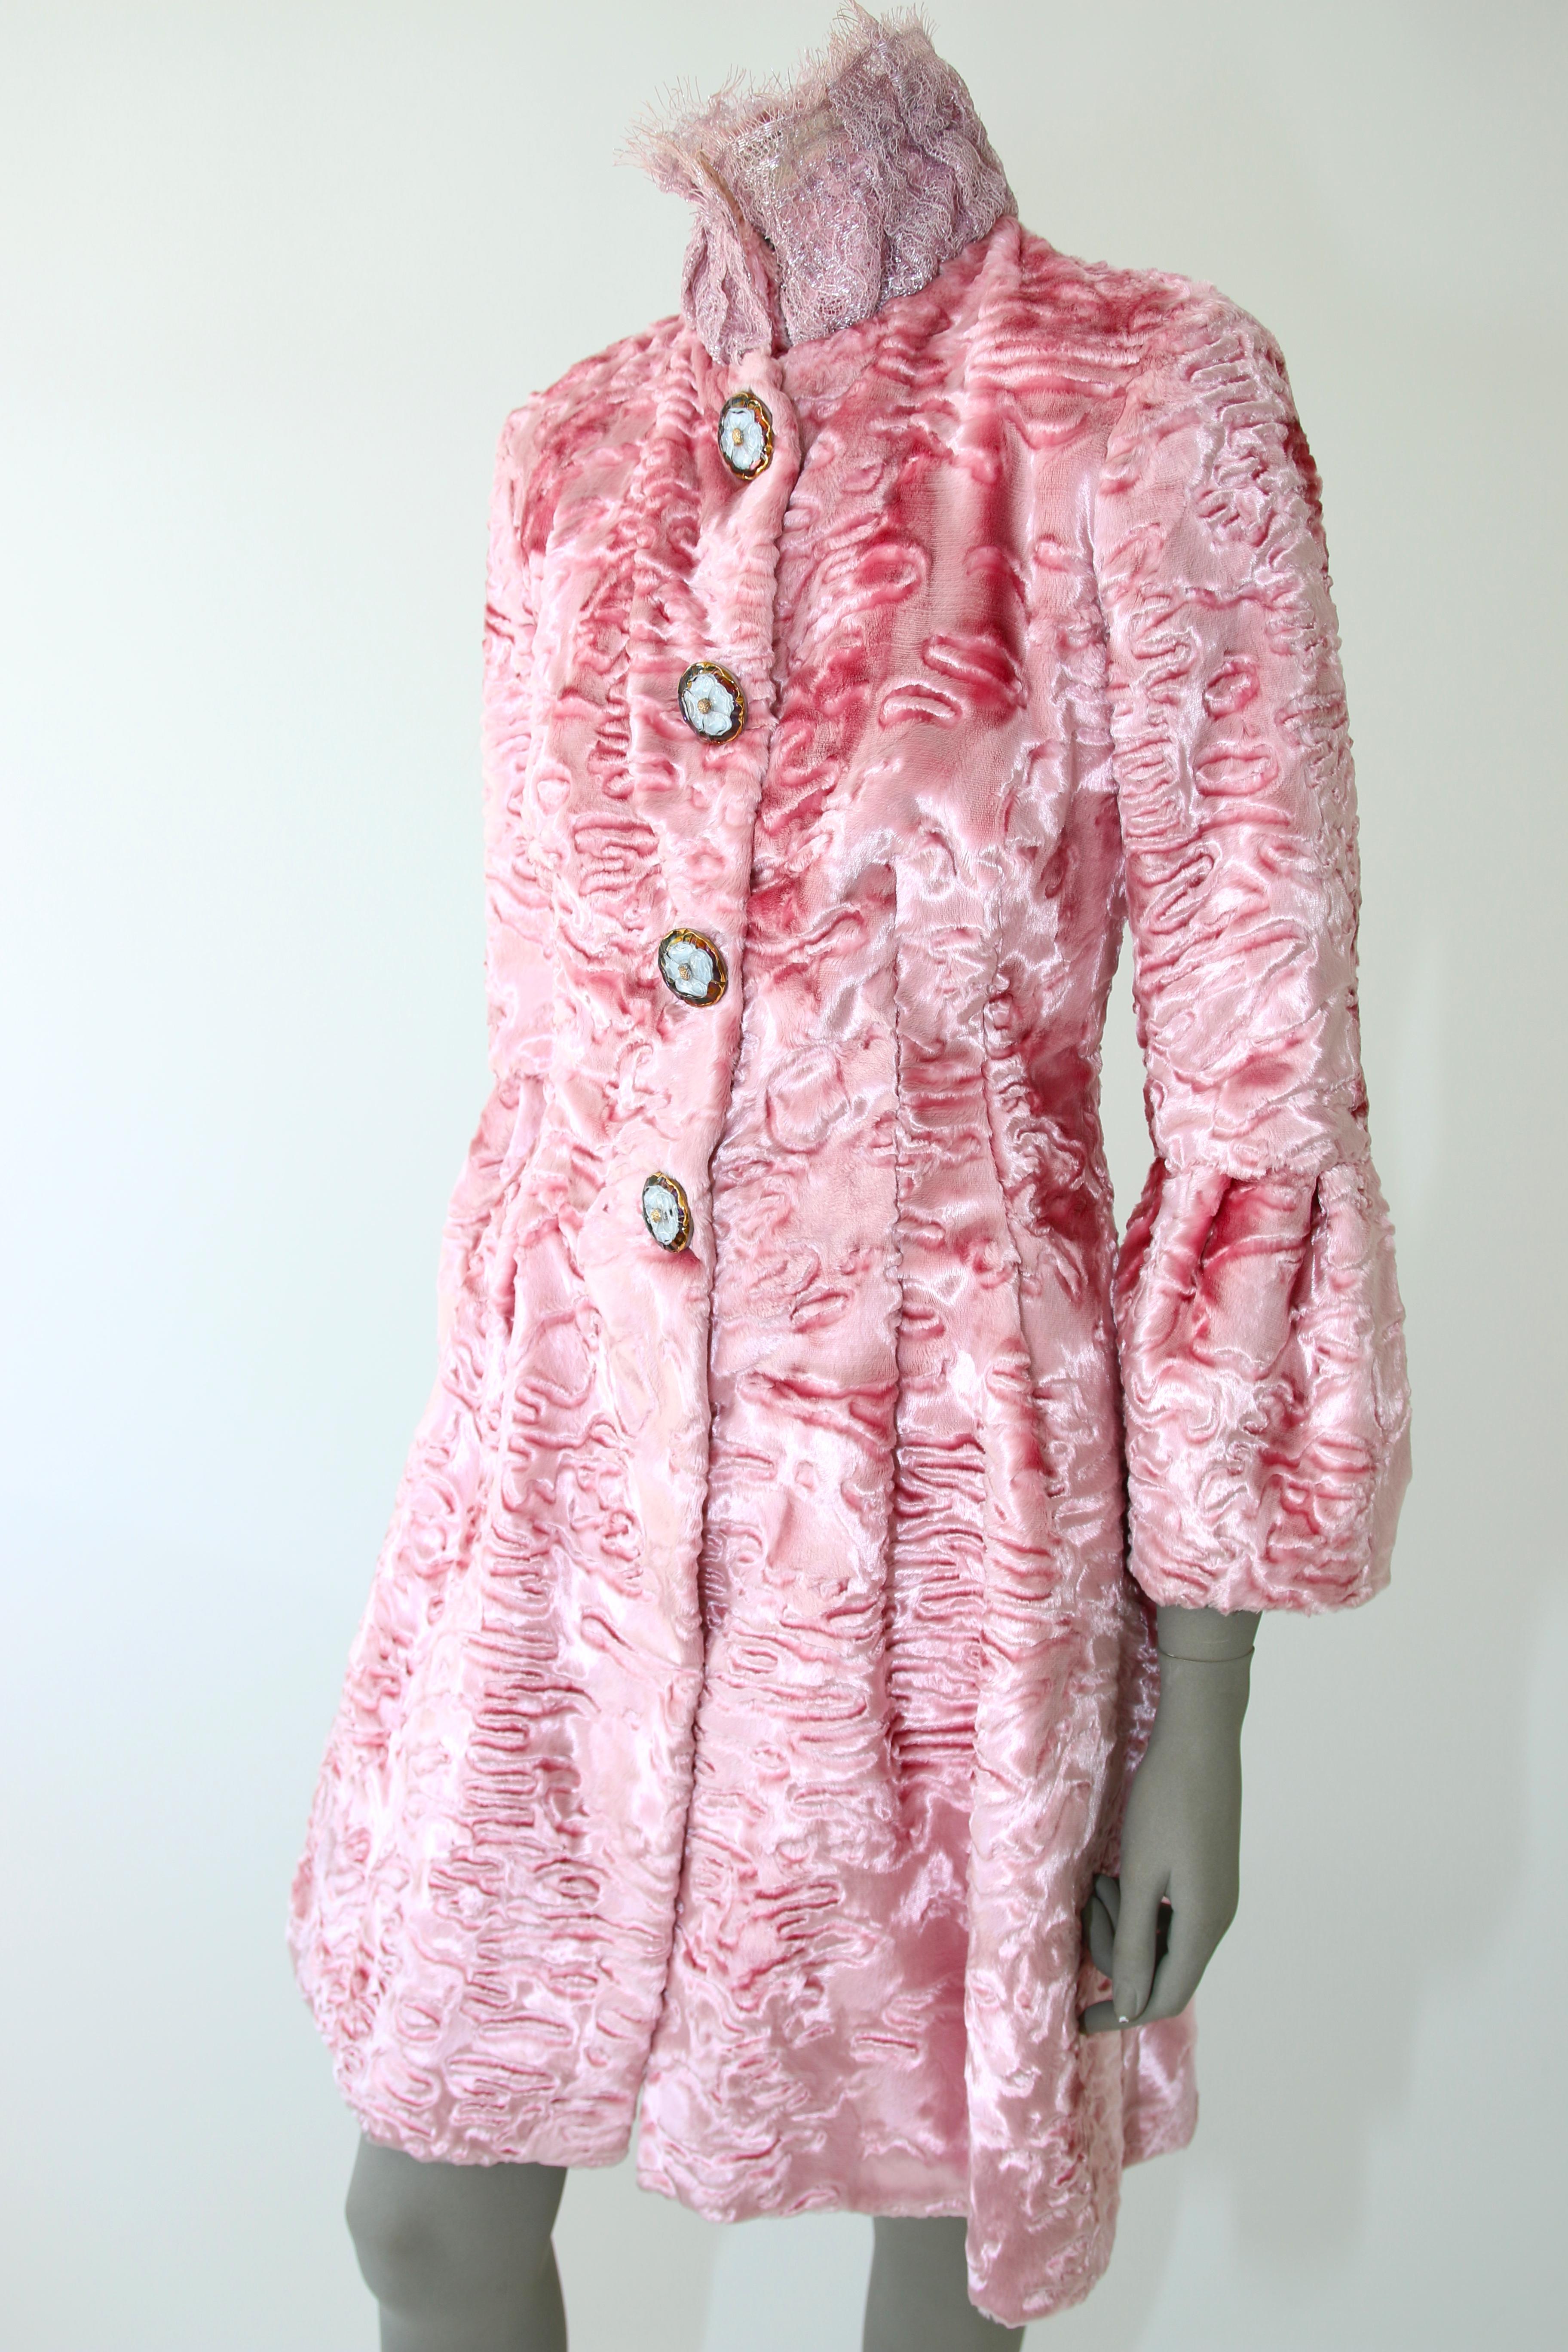 Pelush Pink Faux Fur Coat with Vintage Glass Buttons and Chantilly Lace - XS 3